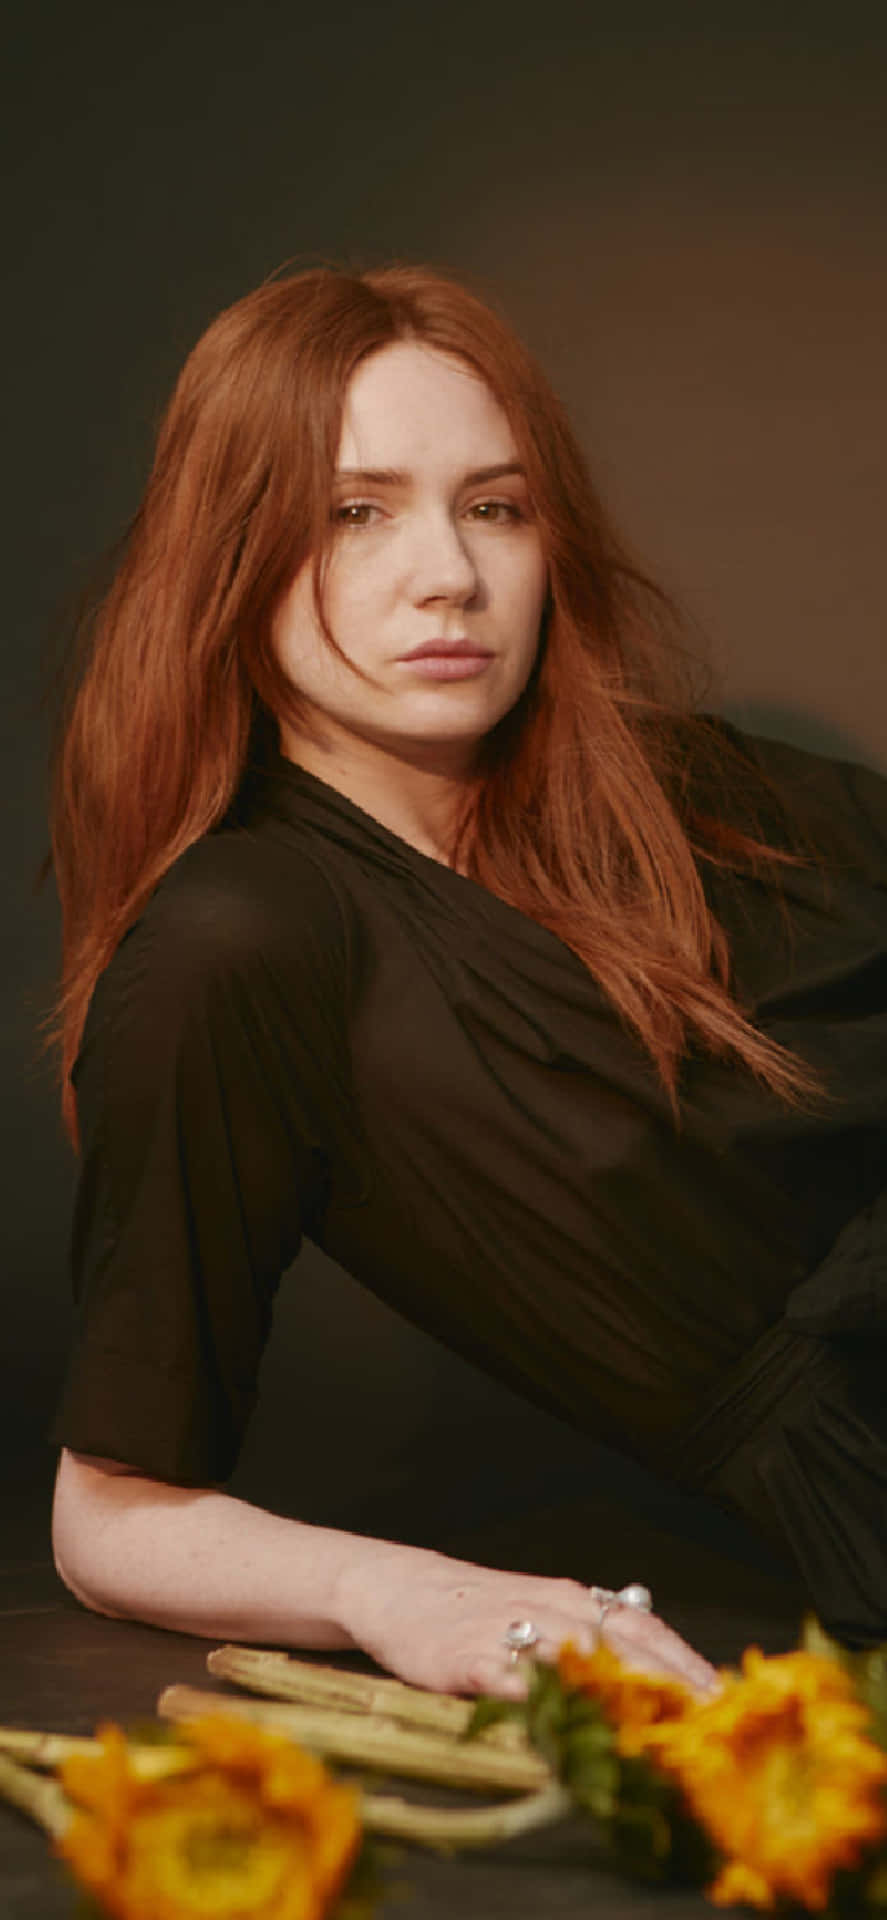 Karen Gillan Poses For A Portrait At The 2018 Summer Tca Tour. Background